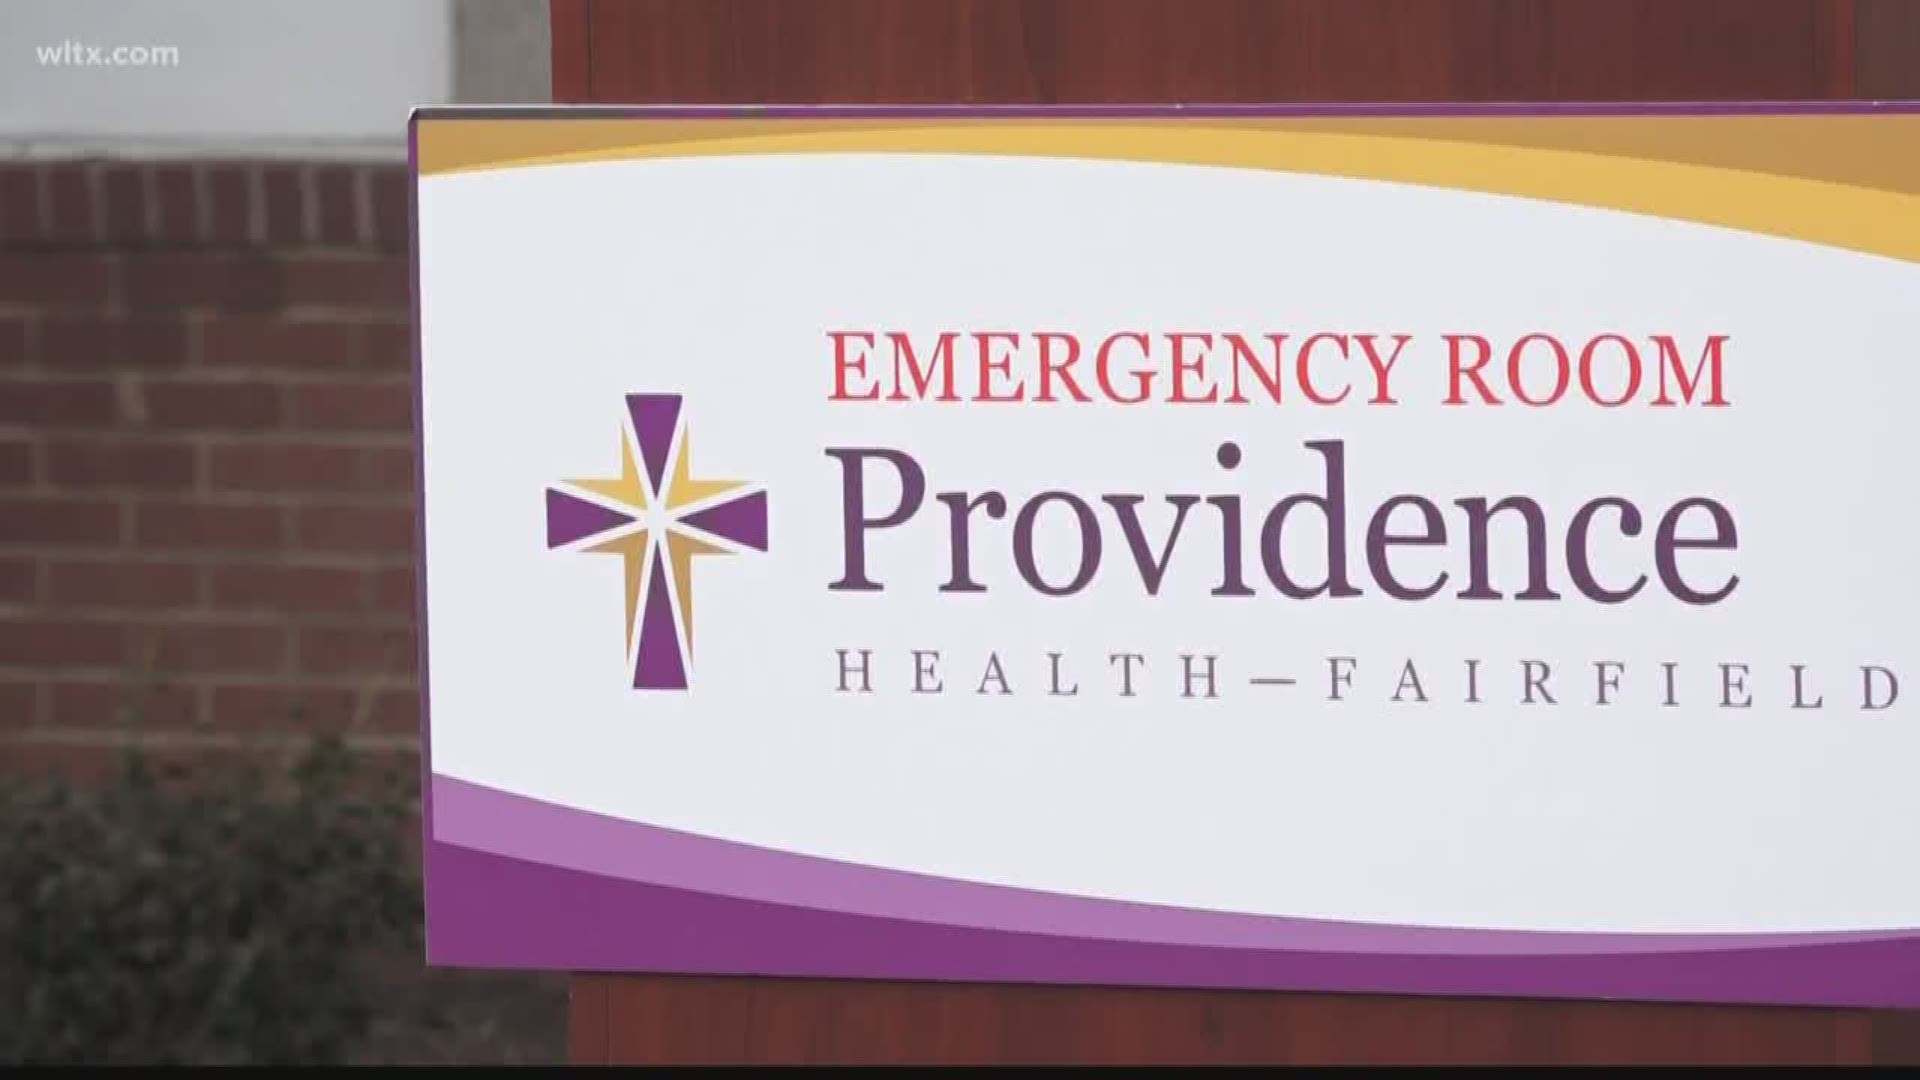 Dozens of people celebrated the opening of a new emergency room at Providence Health in Fairfield County. It will offer 24 hour care to the community.